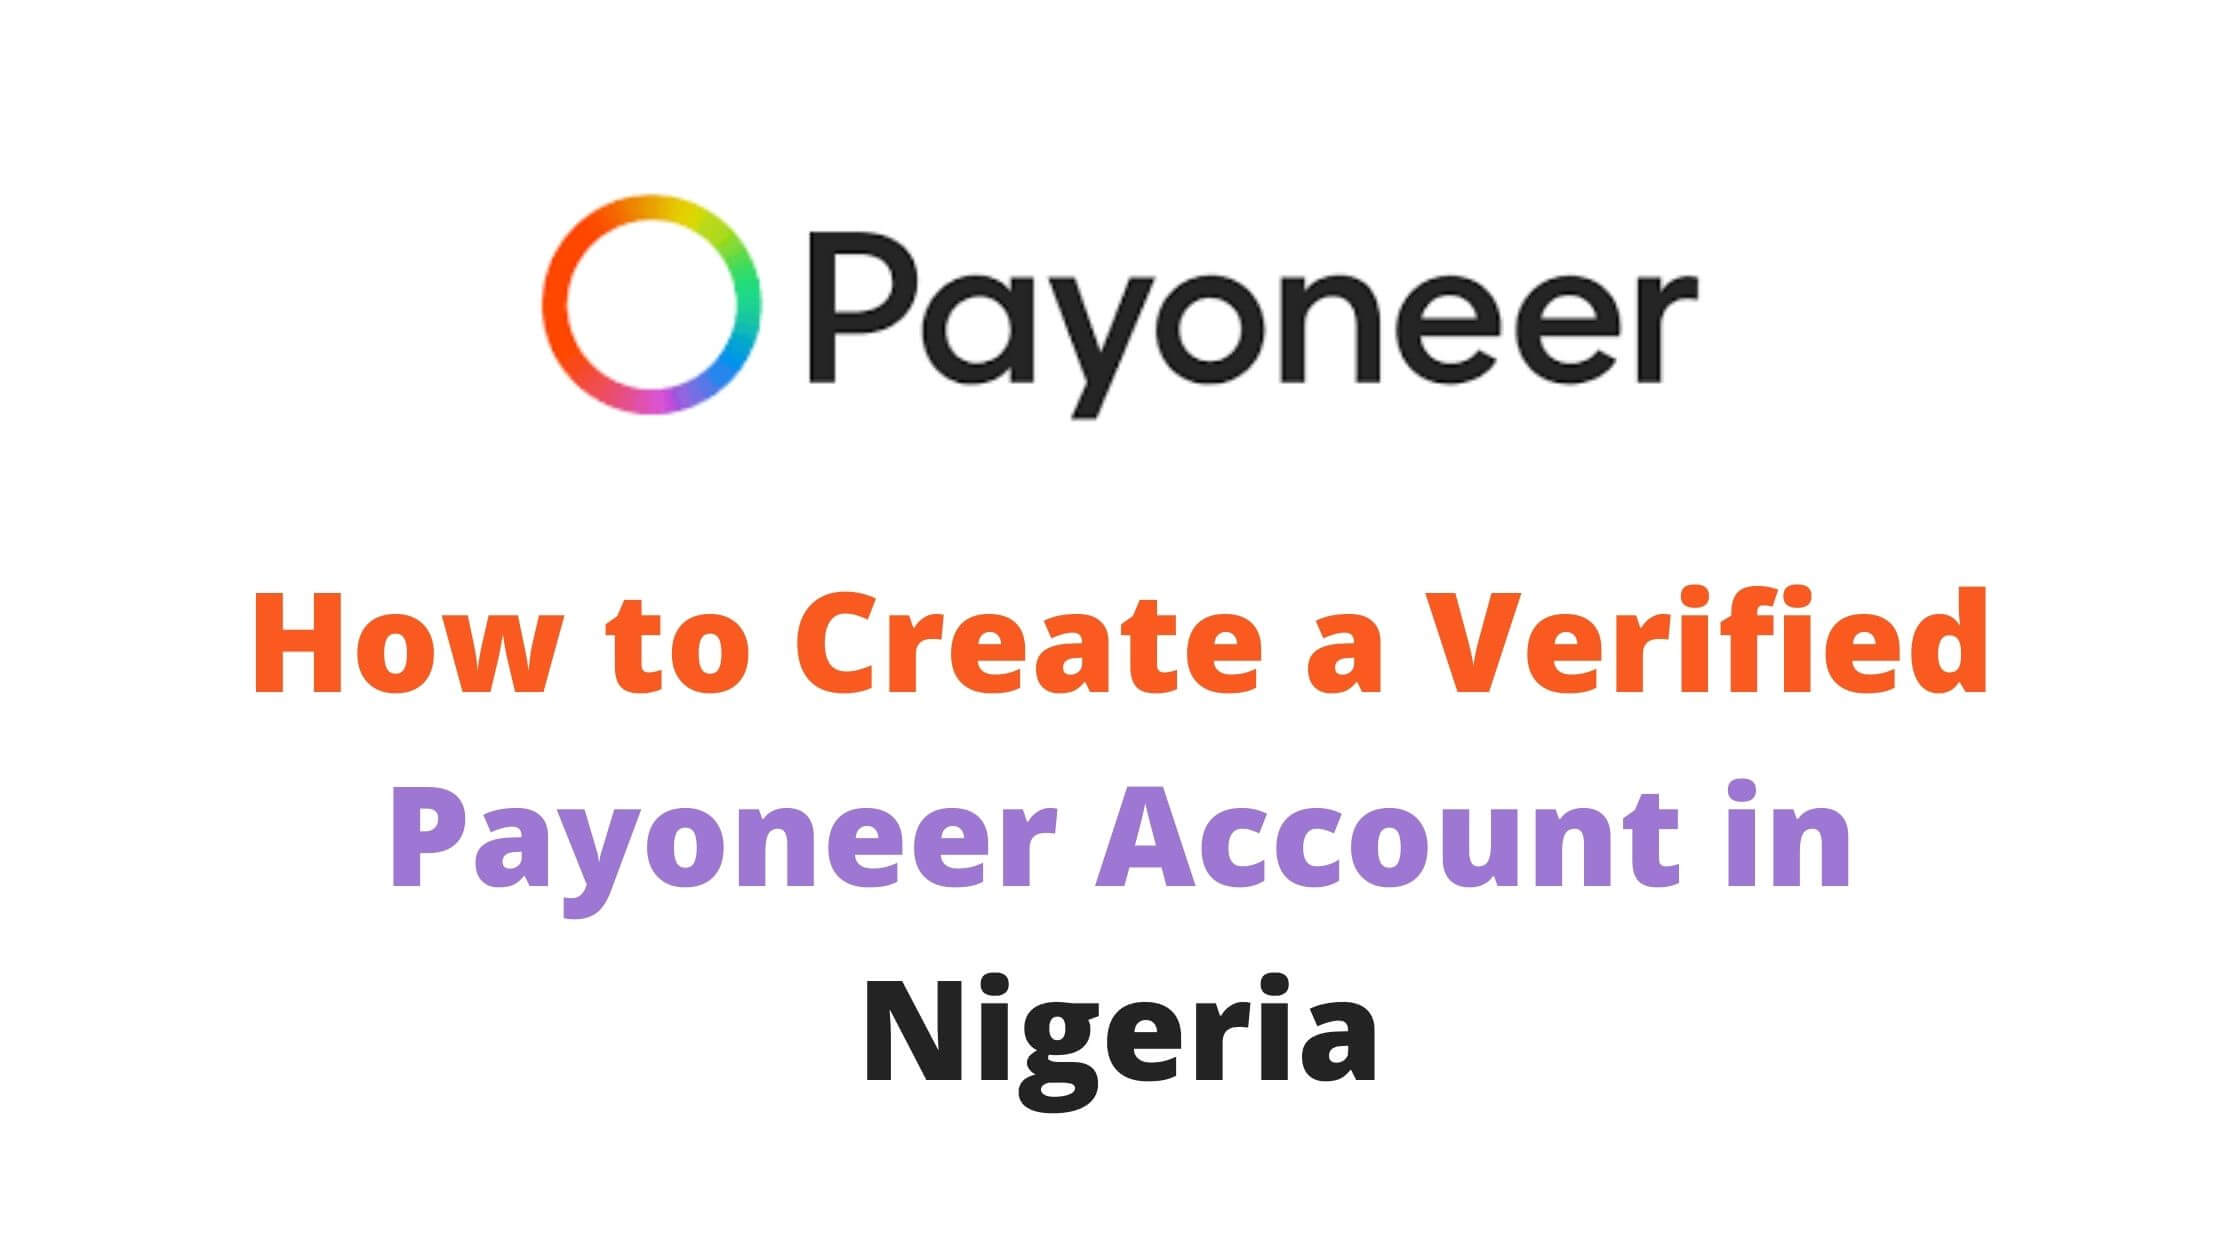 How to Create a Payoneer Account in Nigeria